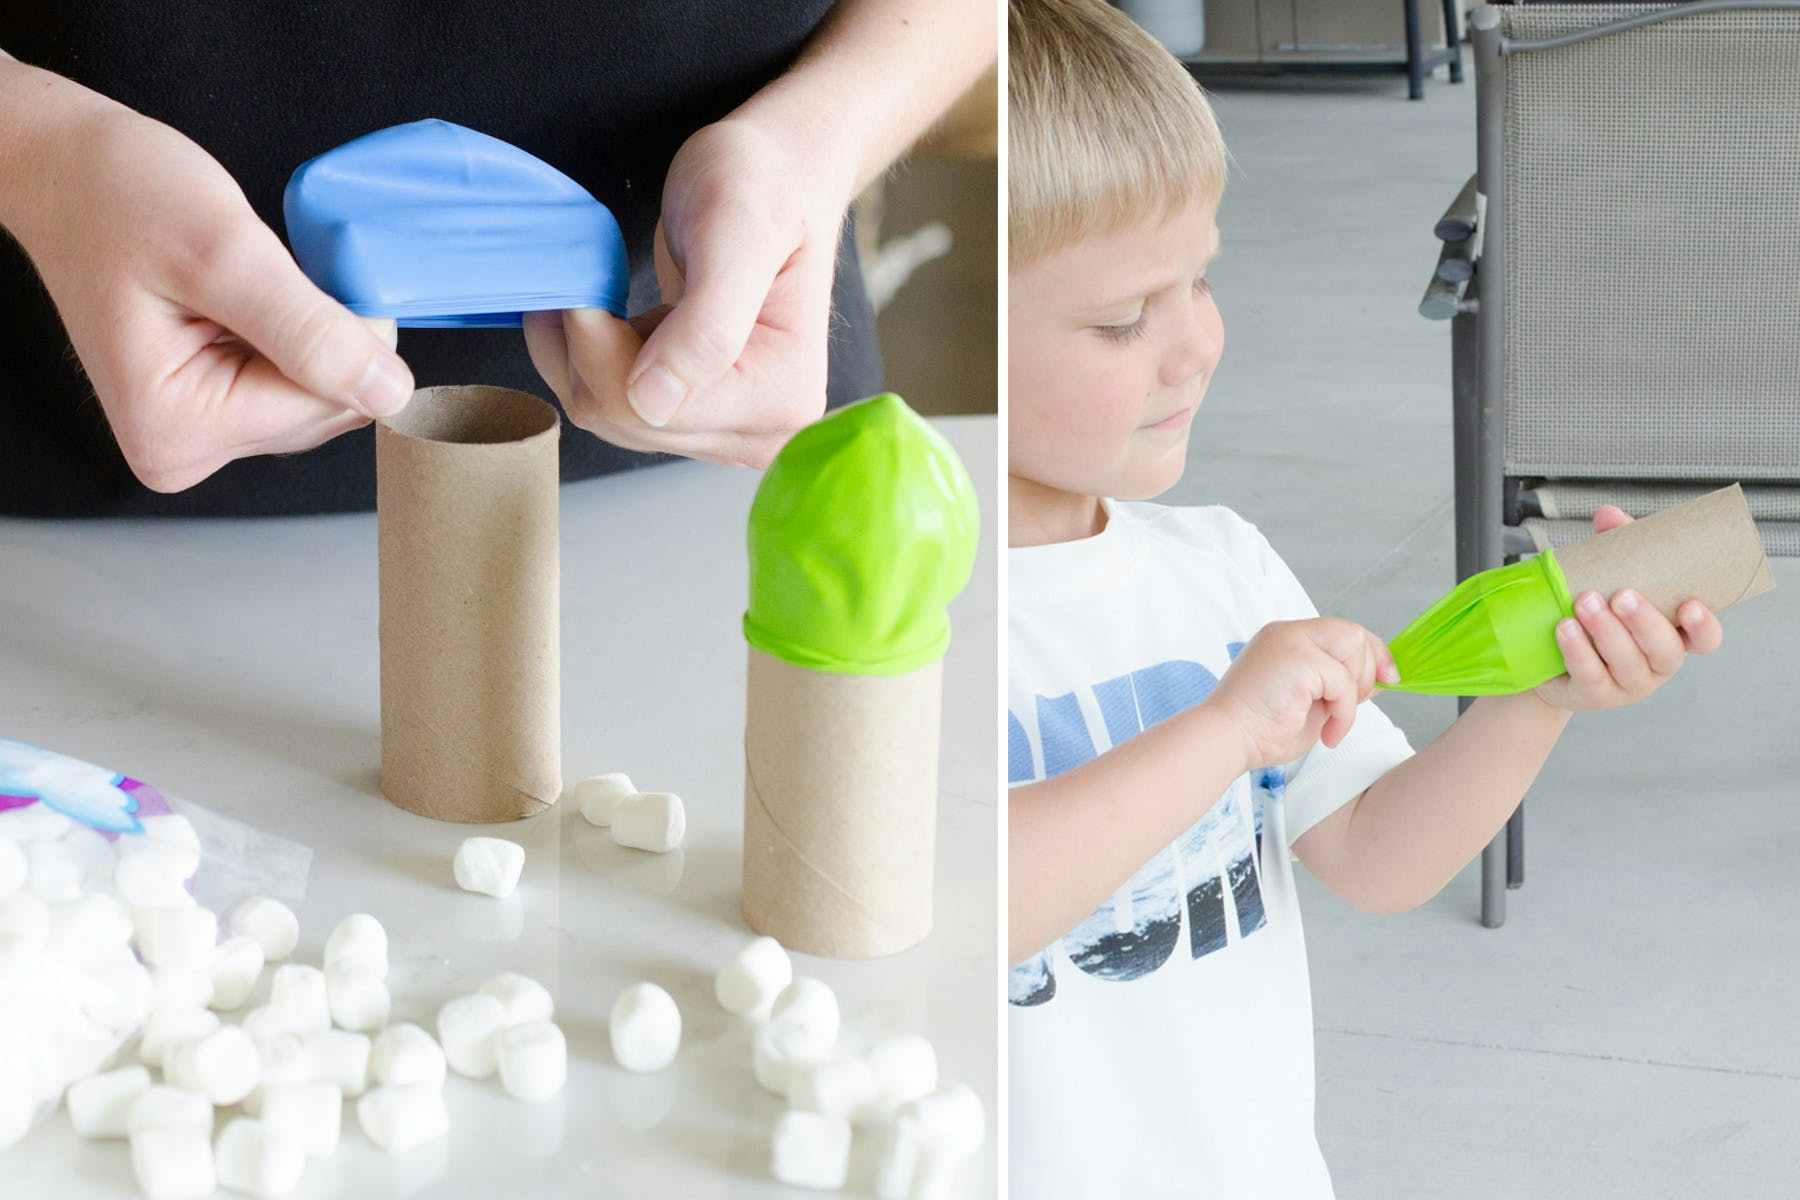 Summer Activities For Kids {MMM #283 Block Party} - Keeping it Simple